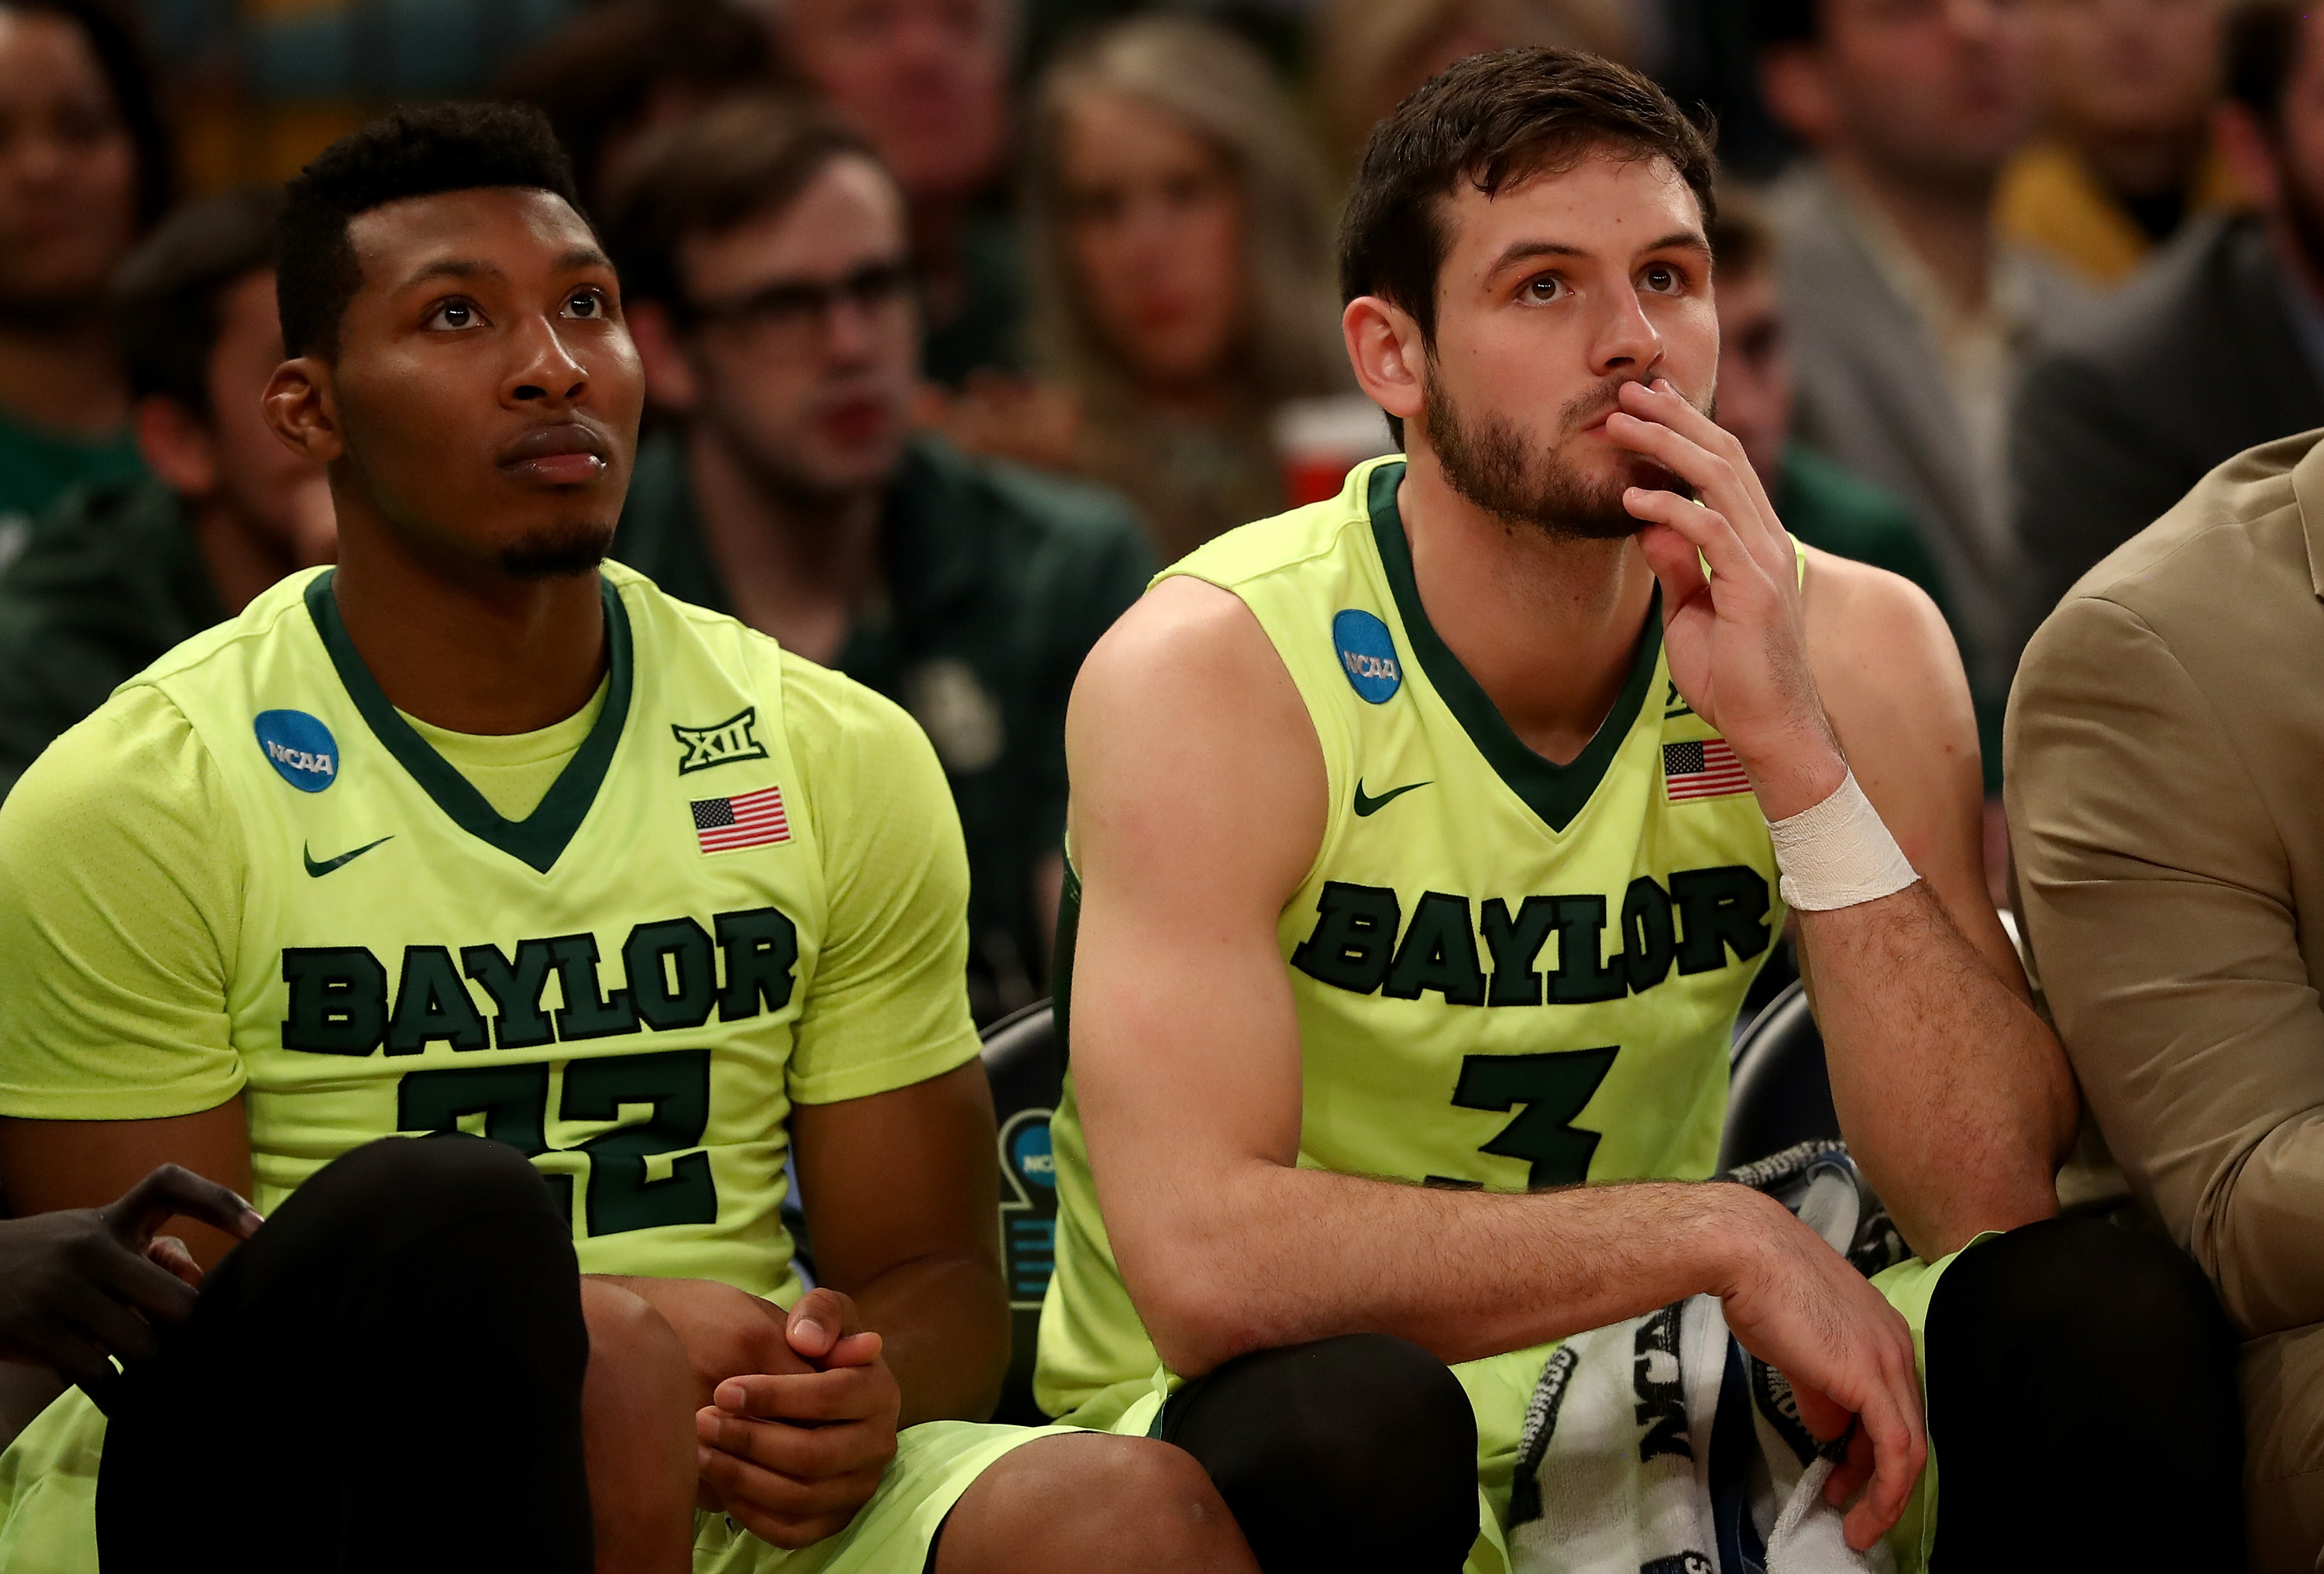 NEW YORK, NY - MARCH 24:  King McClure #22 and Jake Lindsey #3 of the Baylor Bears look on from the bench in the second half against the South Carolina Gamecocks during the 2017 NCAA Men's Basketball Tournament East Regional at Madison Square Garden on March 24, 2017 in New York City.  (Photo by Elsa/Getty Images)